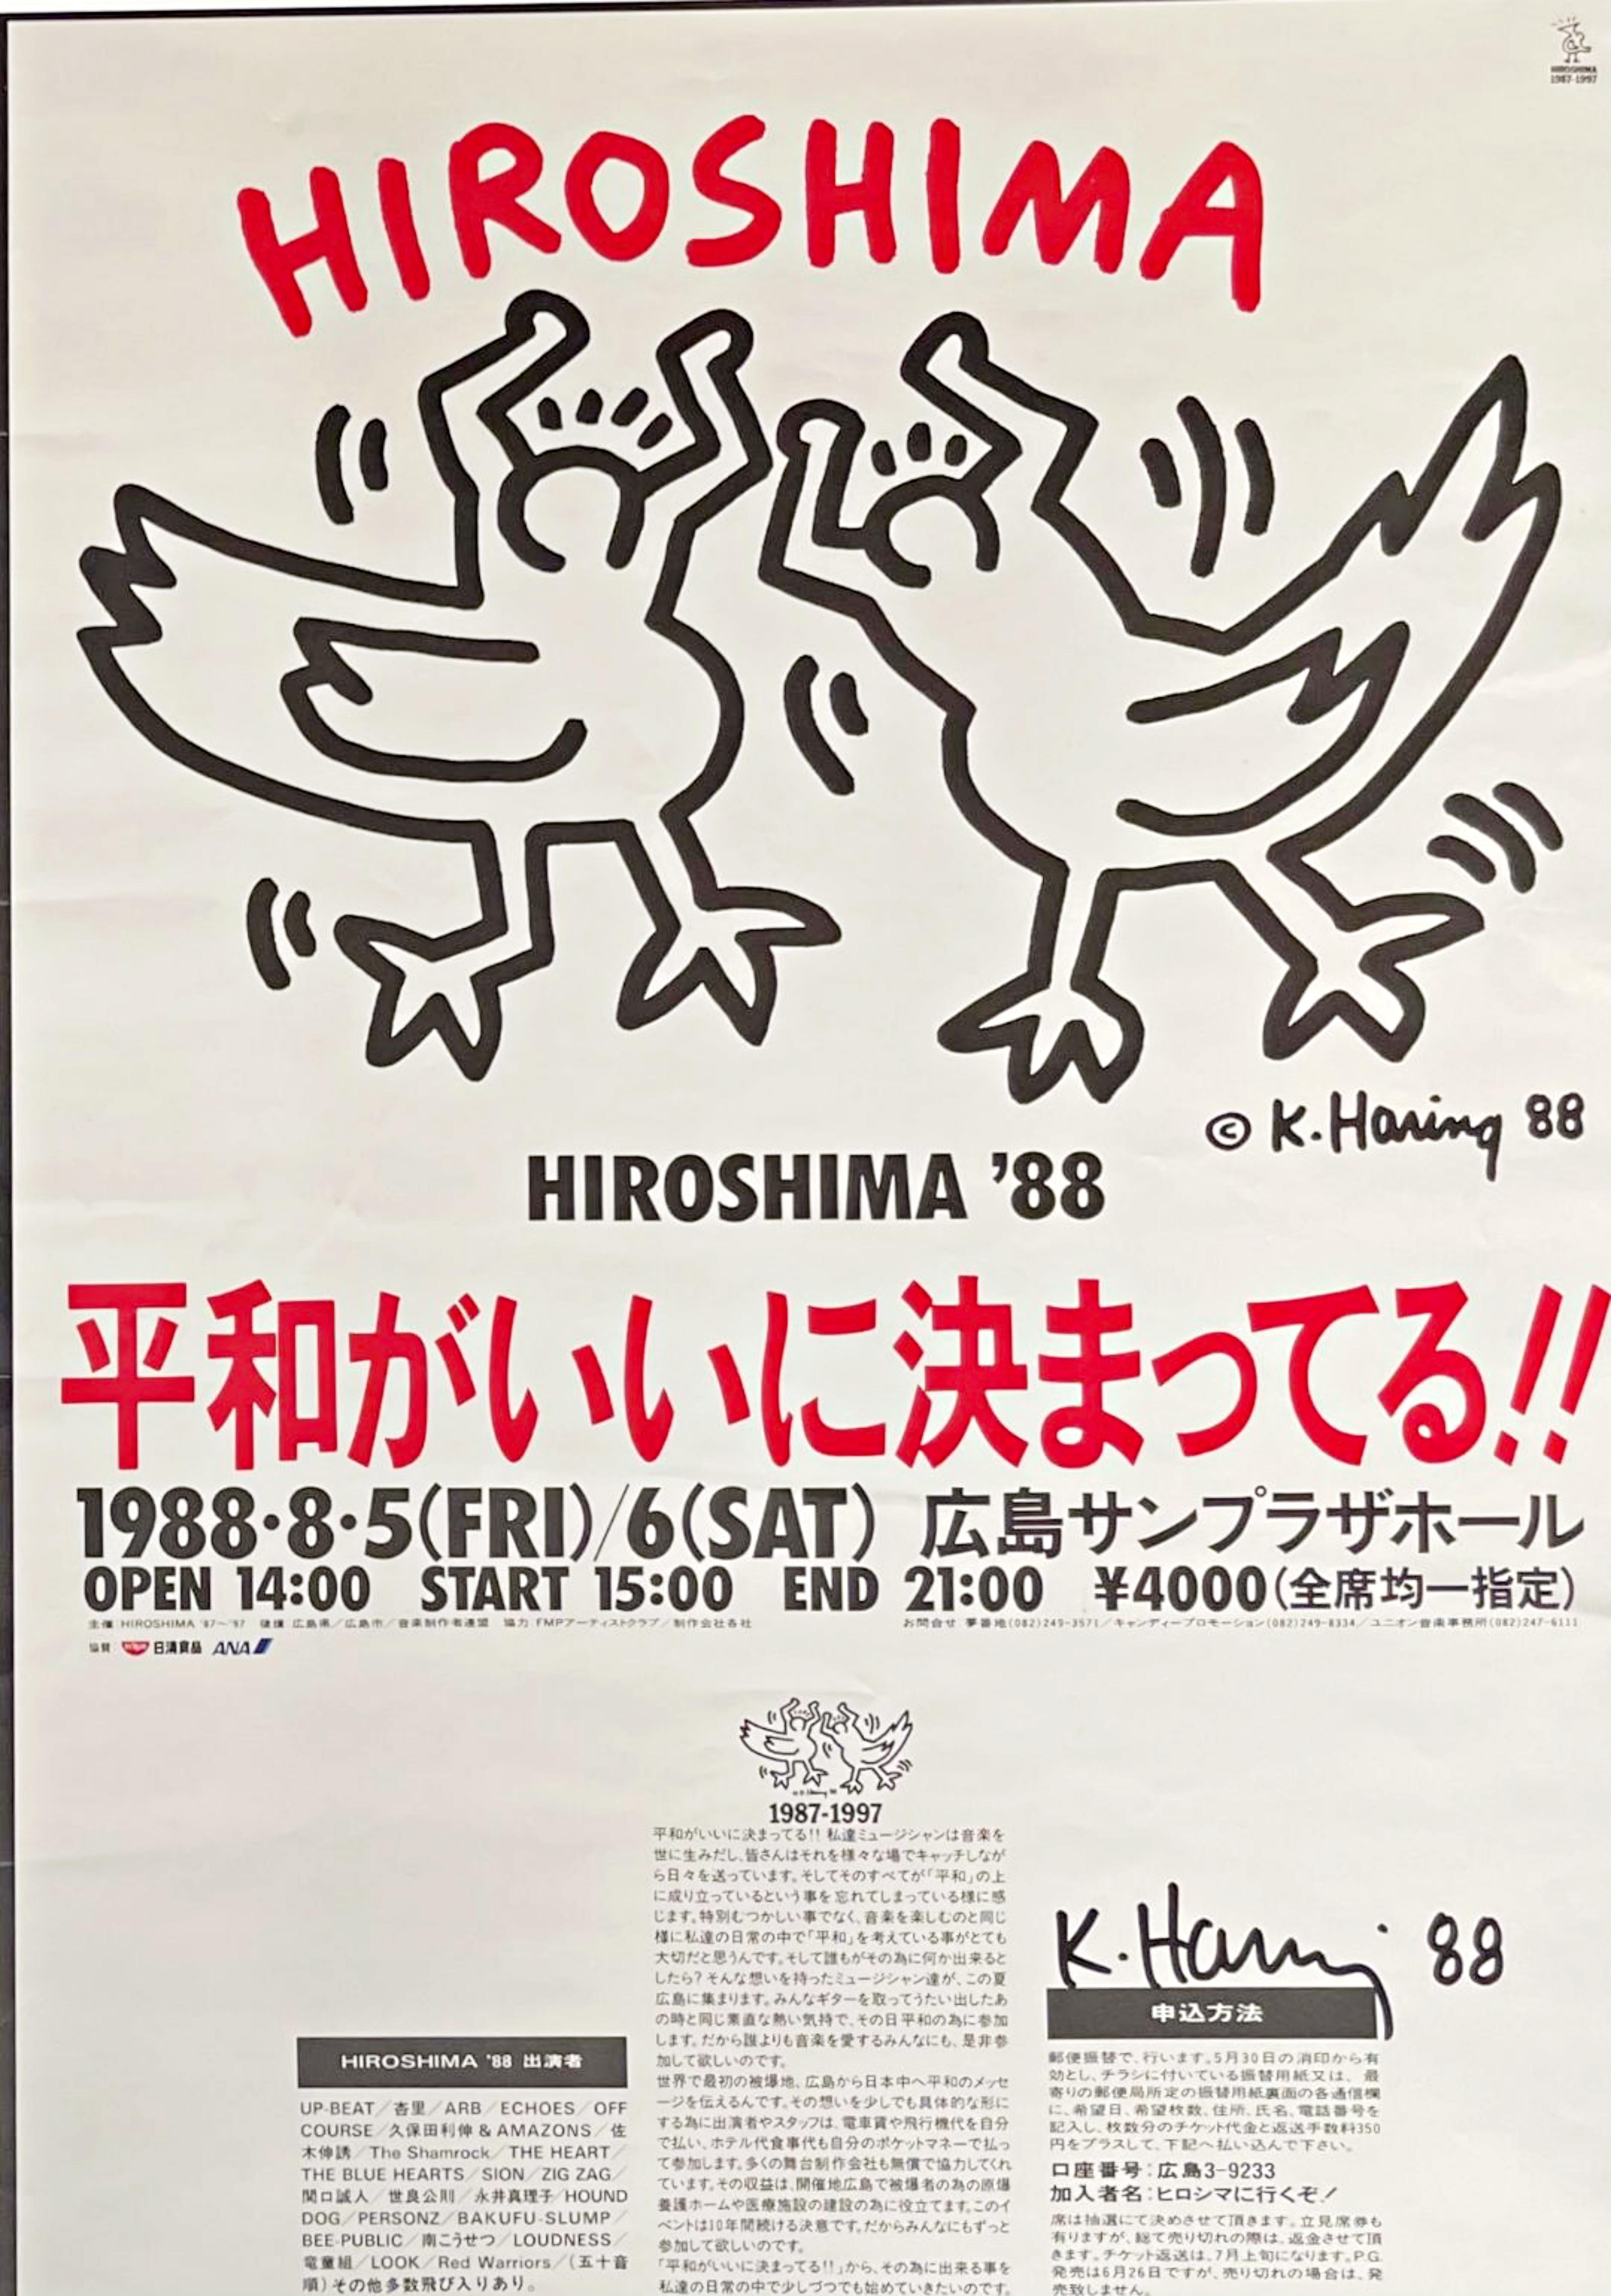 Keith Haring
Rare Hiroshima Peace Celebration poster (hand signed by Keith Haring), from the Patrick Eddington Collection, 1988
Original offset lithograph (Hand signed by Keith Haring expressly for Patrick Eddington)
Signed boldly in black marker